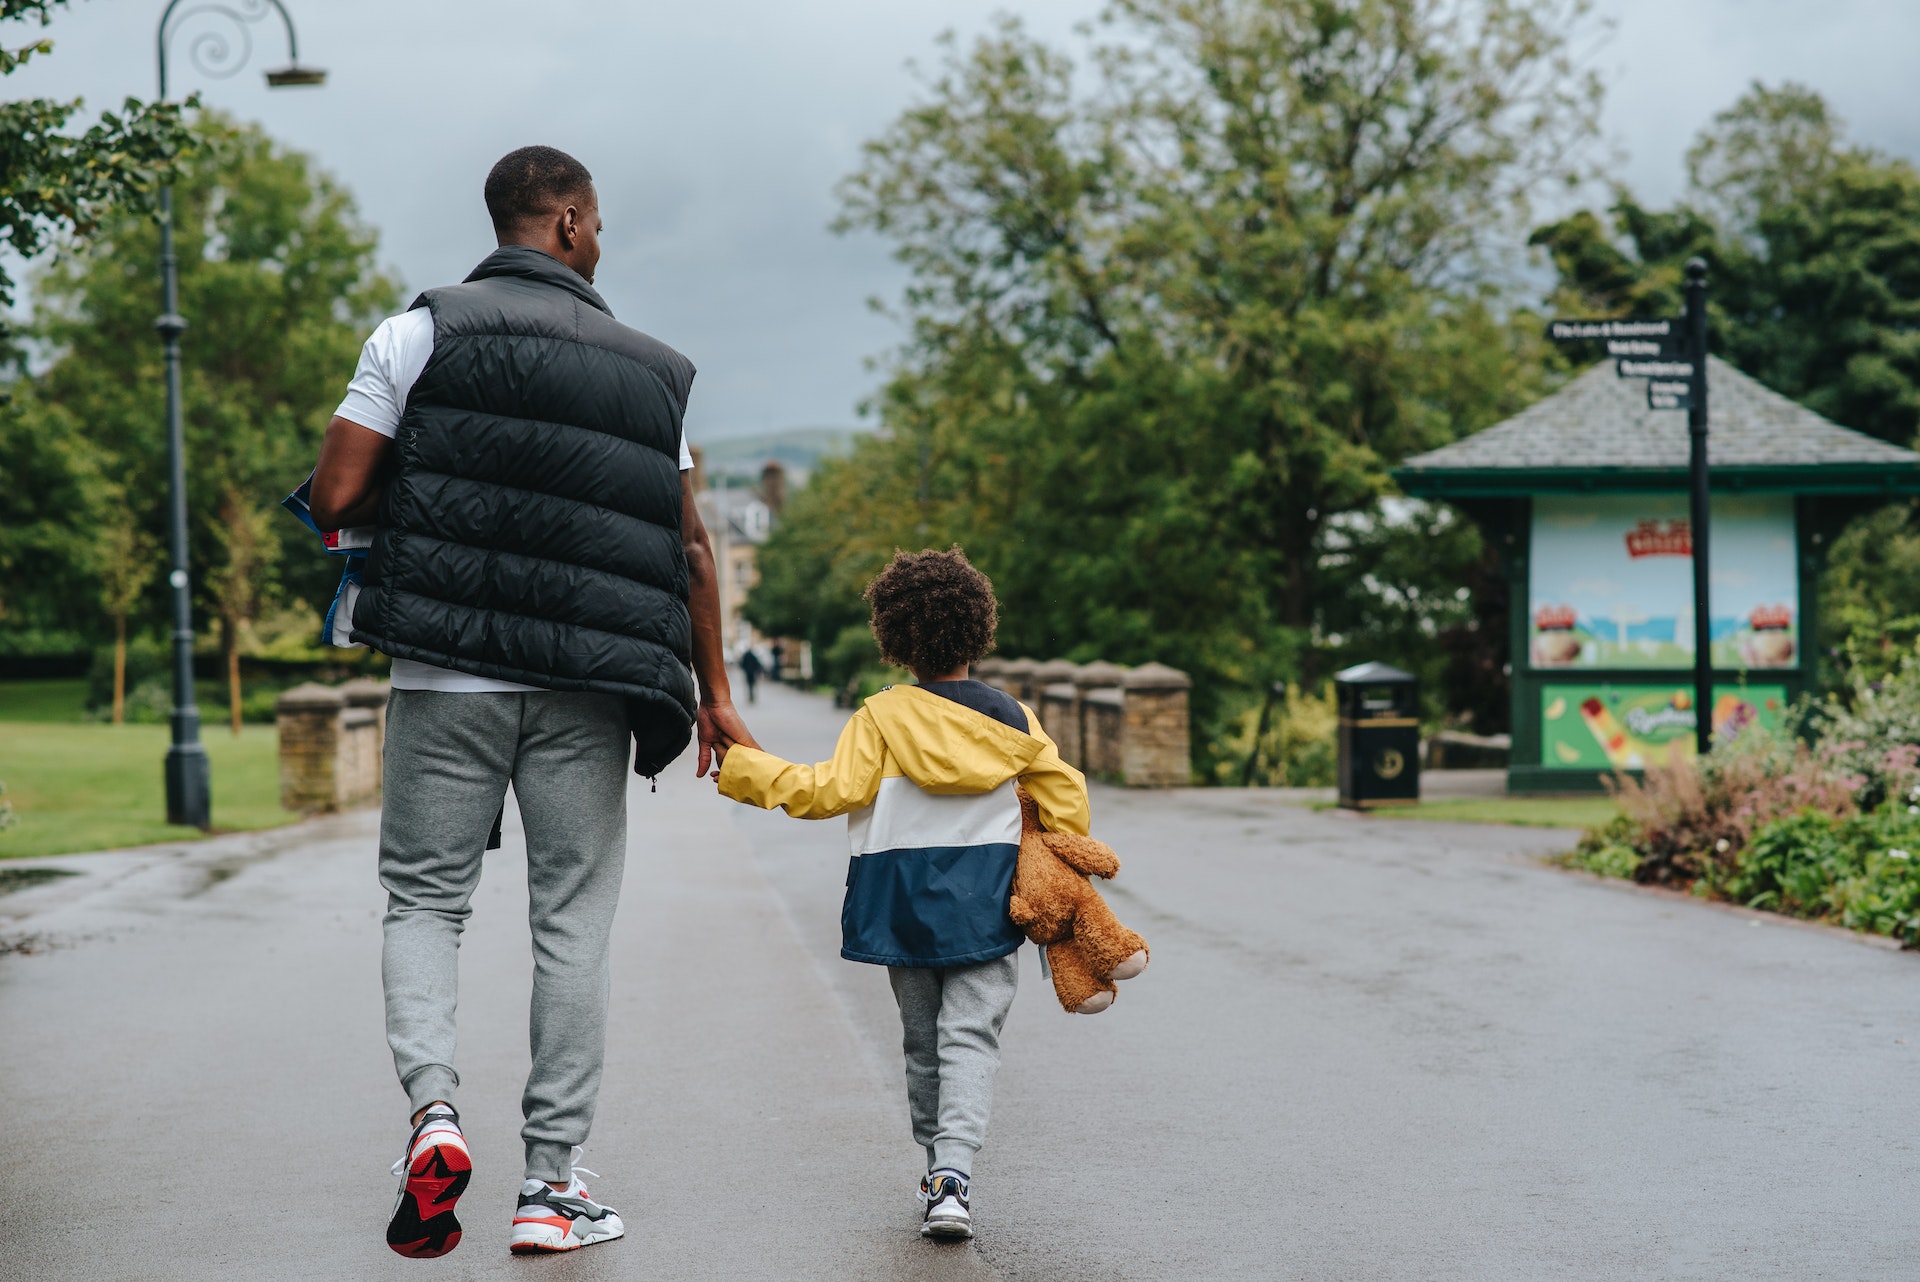 A father walks with his young child. LeSar Support Services partners with clients to create healthy and sustainable communities.